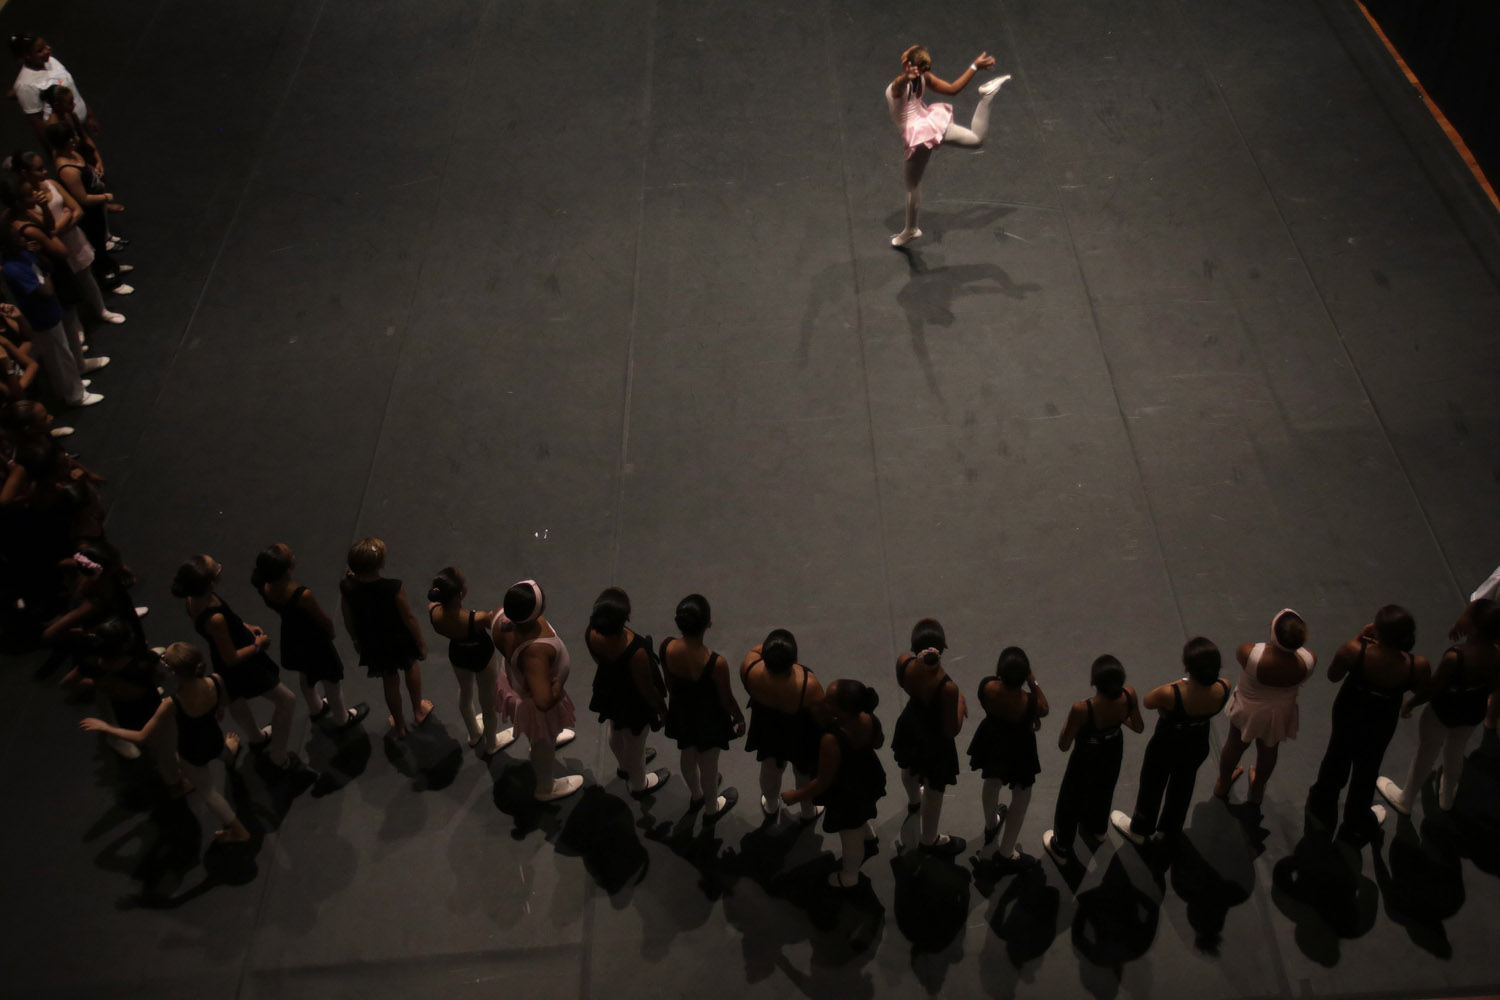 Students attend a masterclass with dancers of the Royal Opera House at the Rio de Janeiro Municipal Theatre